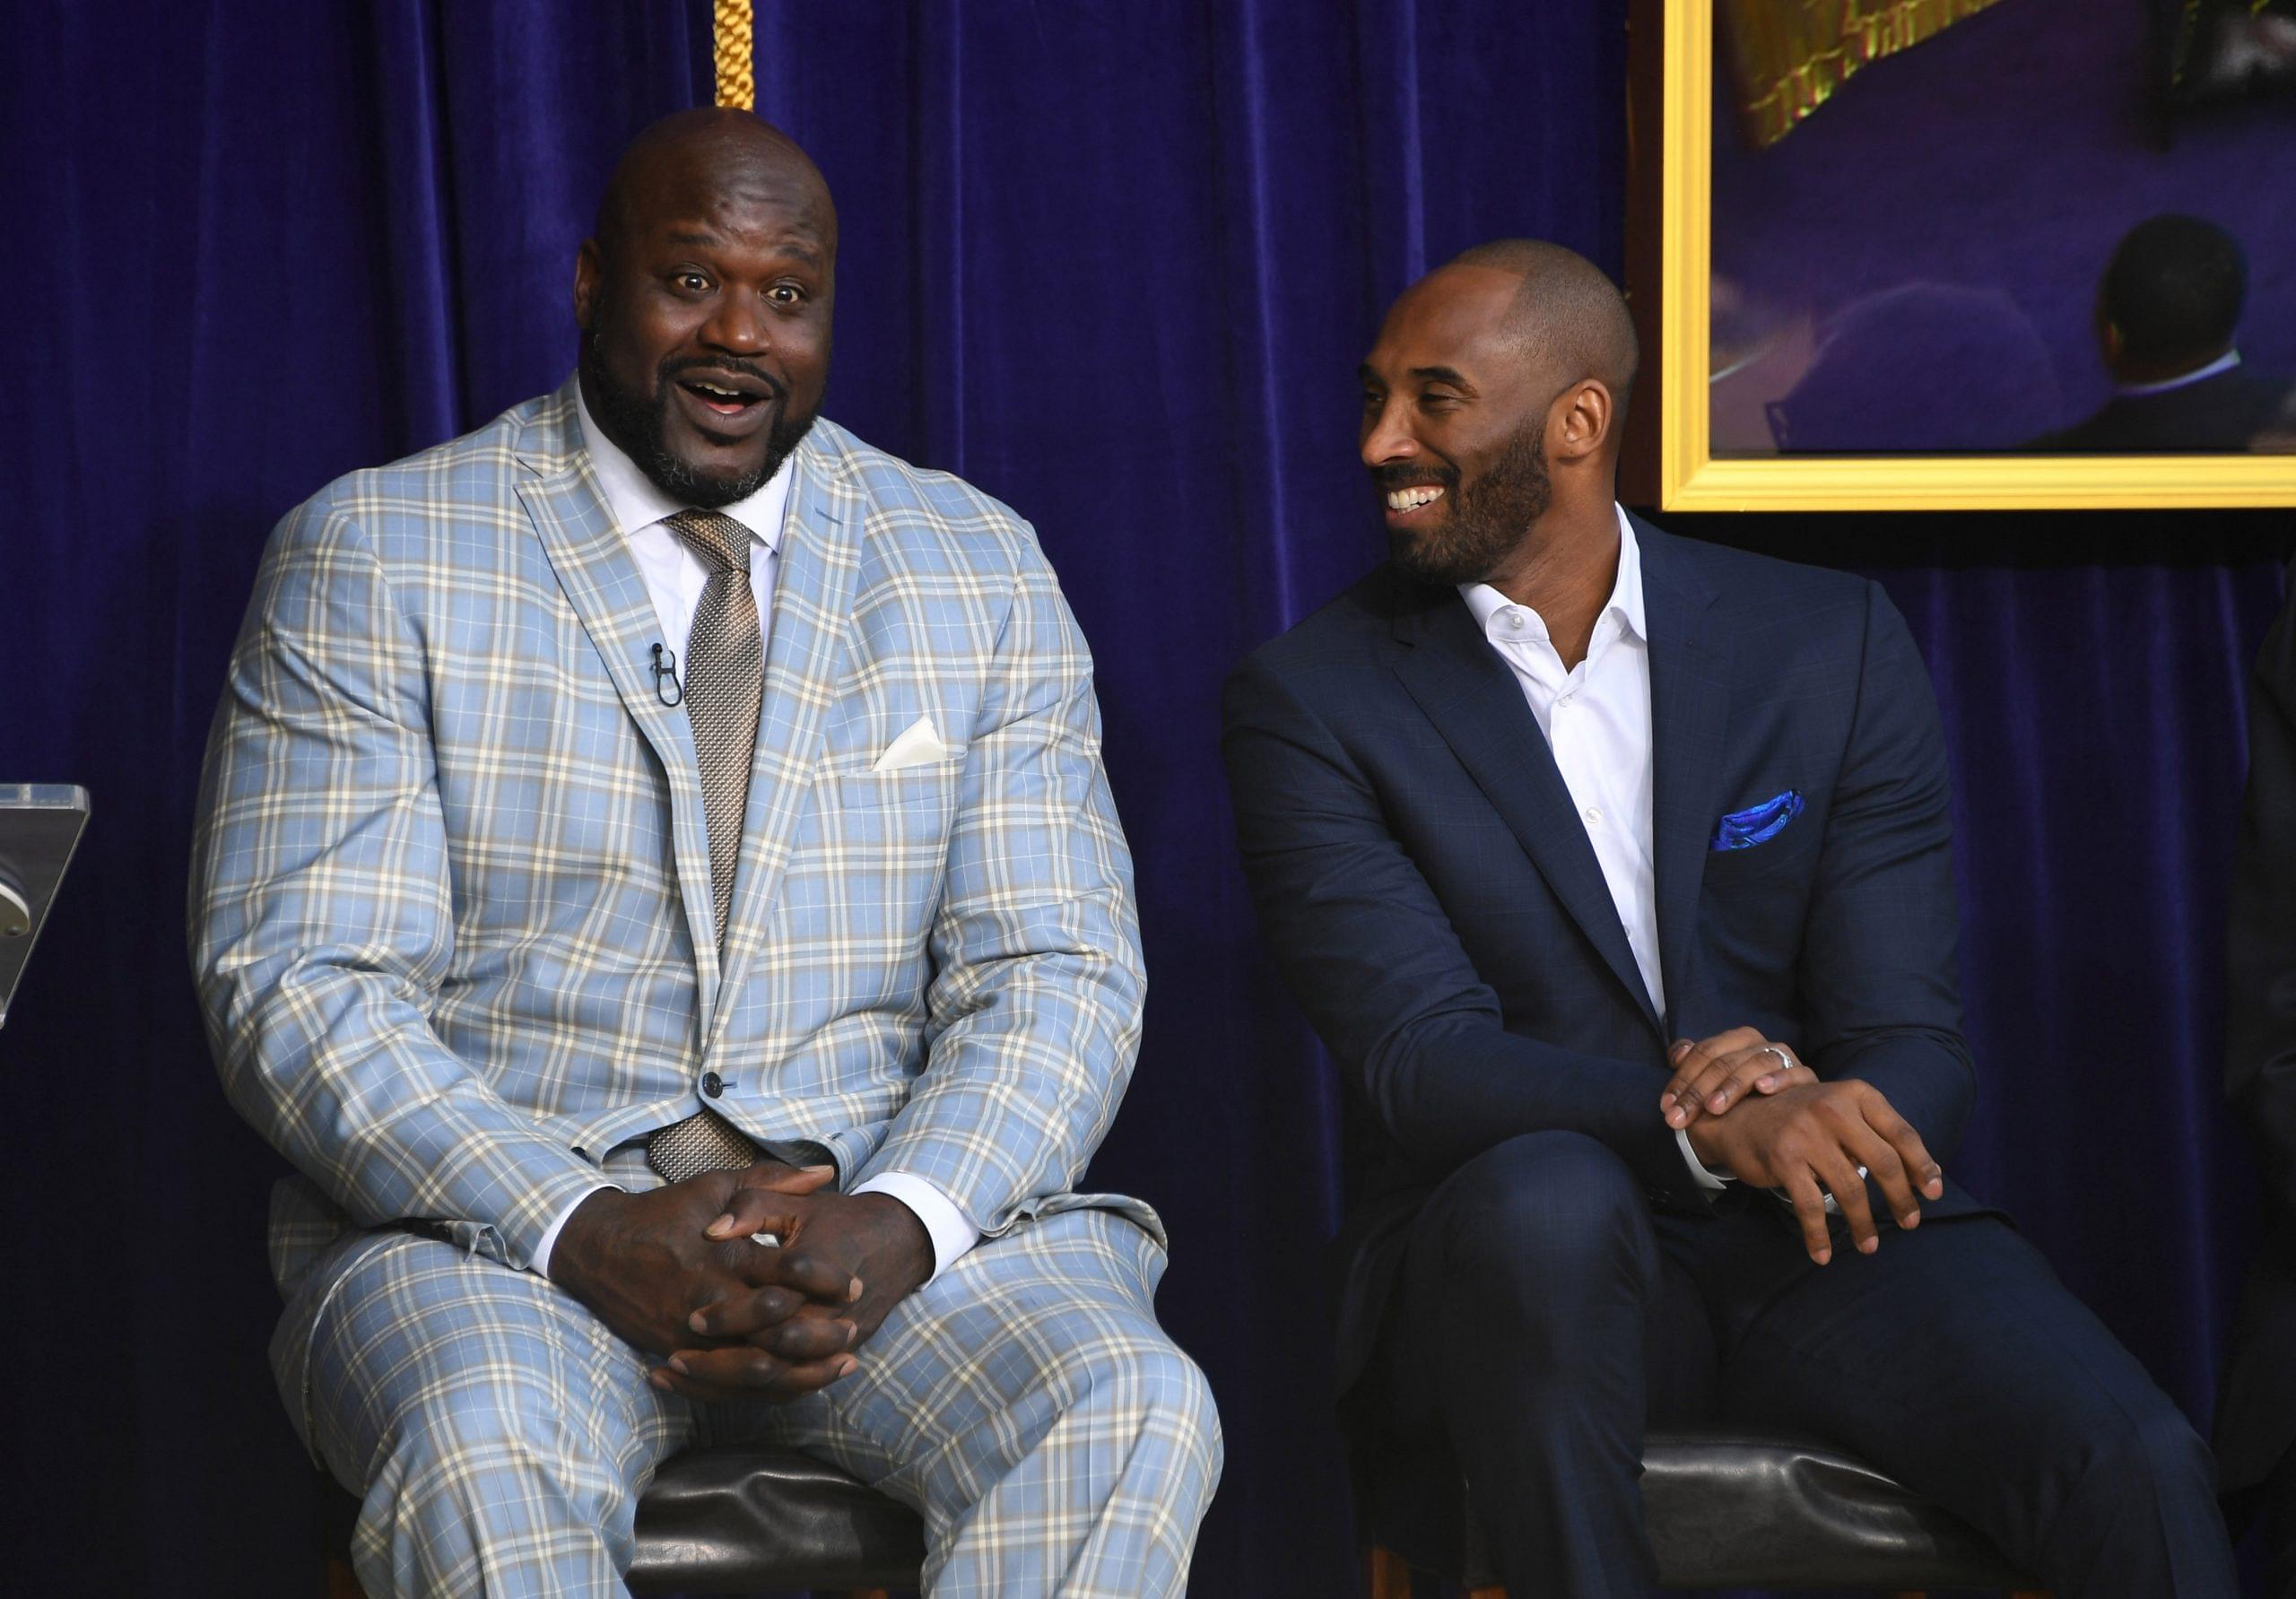 Shaquille O'Neal, who took $100 million to leave Kobe Bryant, was hit with a cruel roast on his WWE appearance